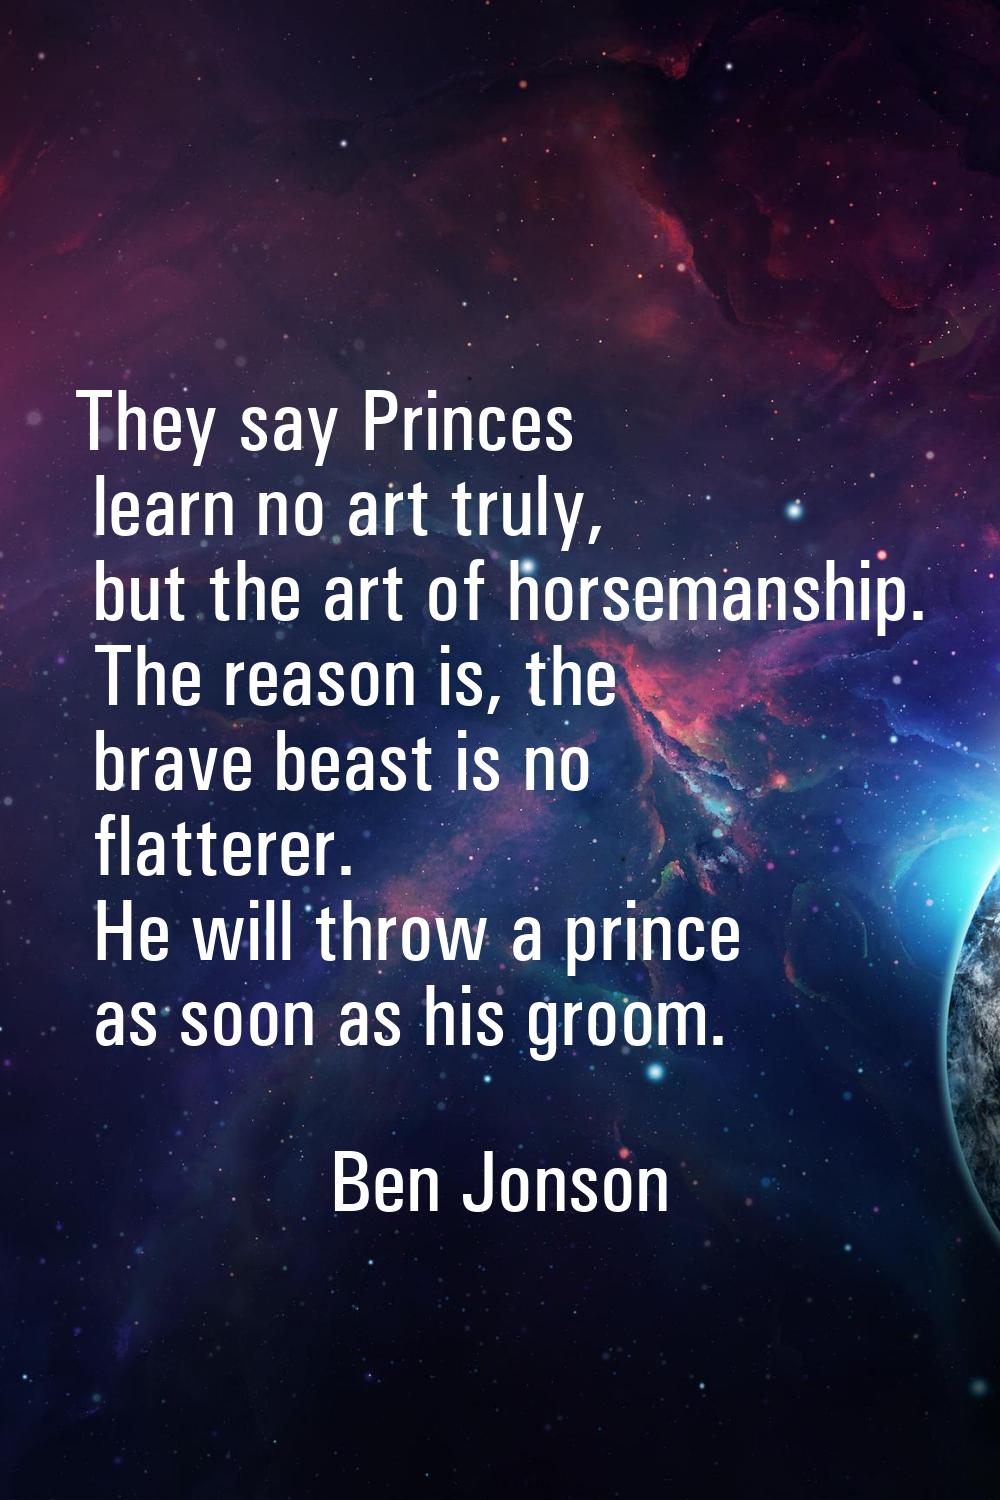 They say Princes learn no art truly, but the art of horsemanship. The reason is, the brave beast is